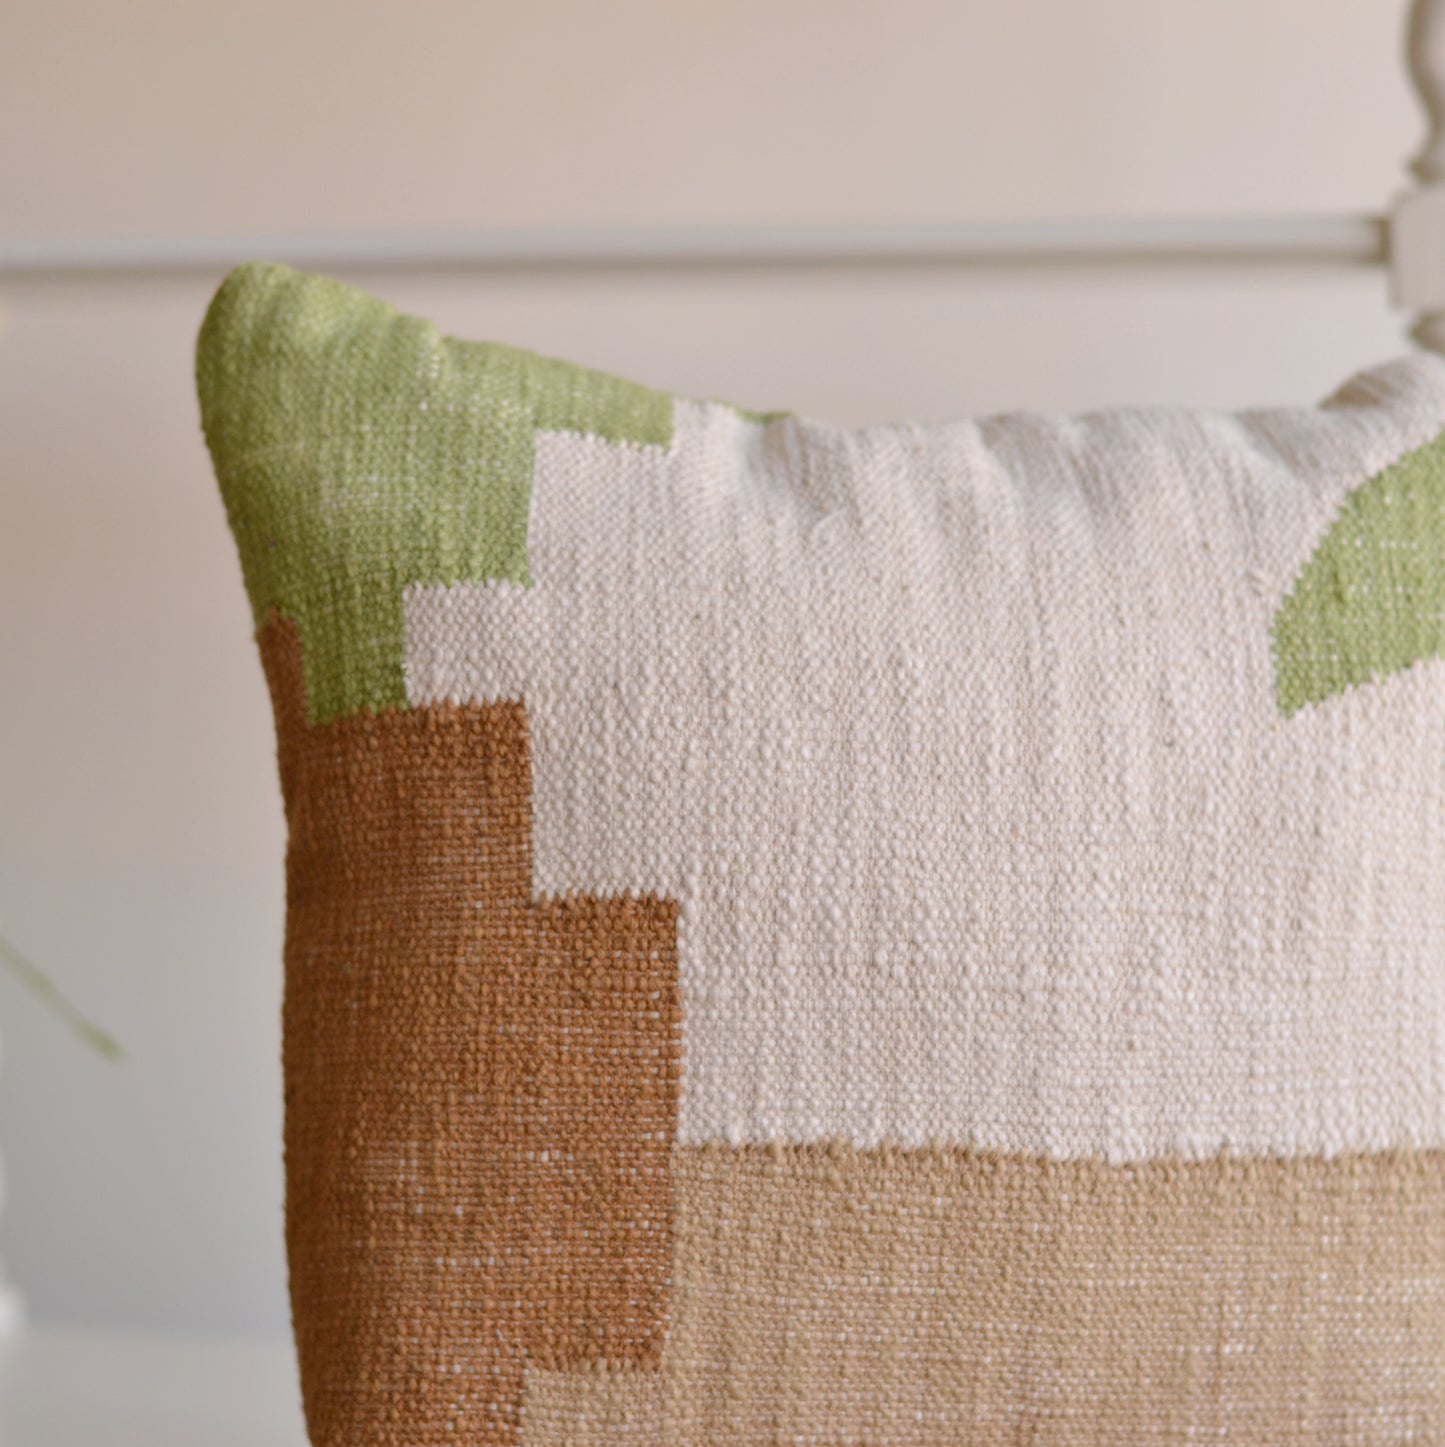 Woven Pillow Cover, 18" x18" Neutrals with Pops of Grassy Green